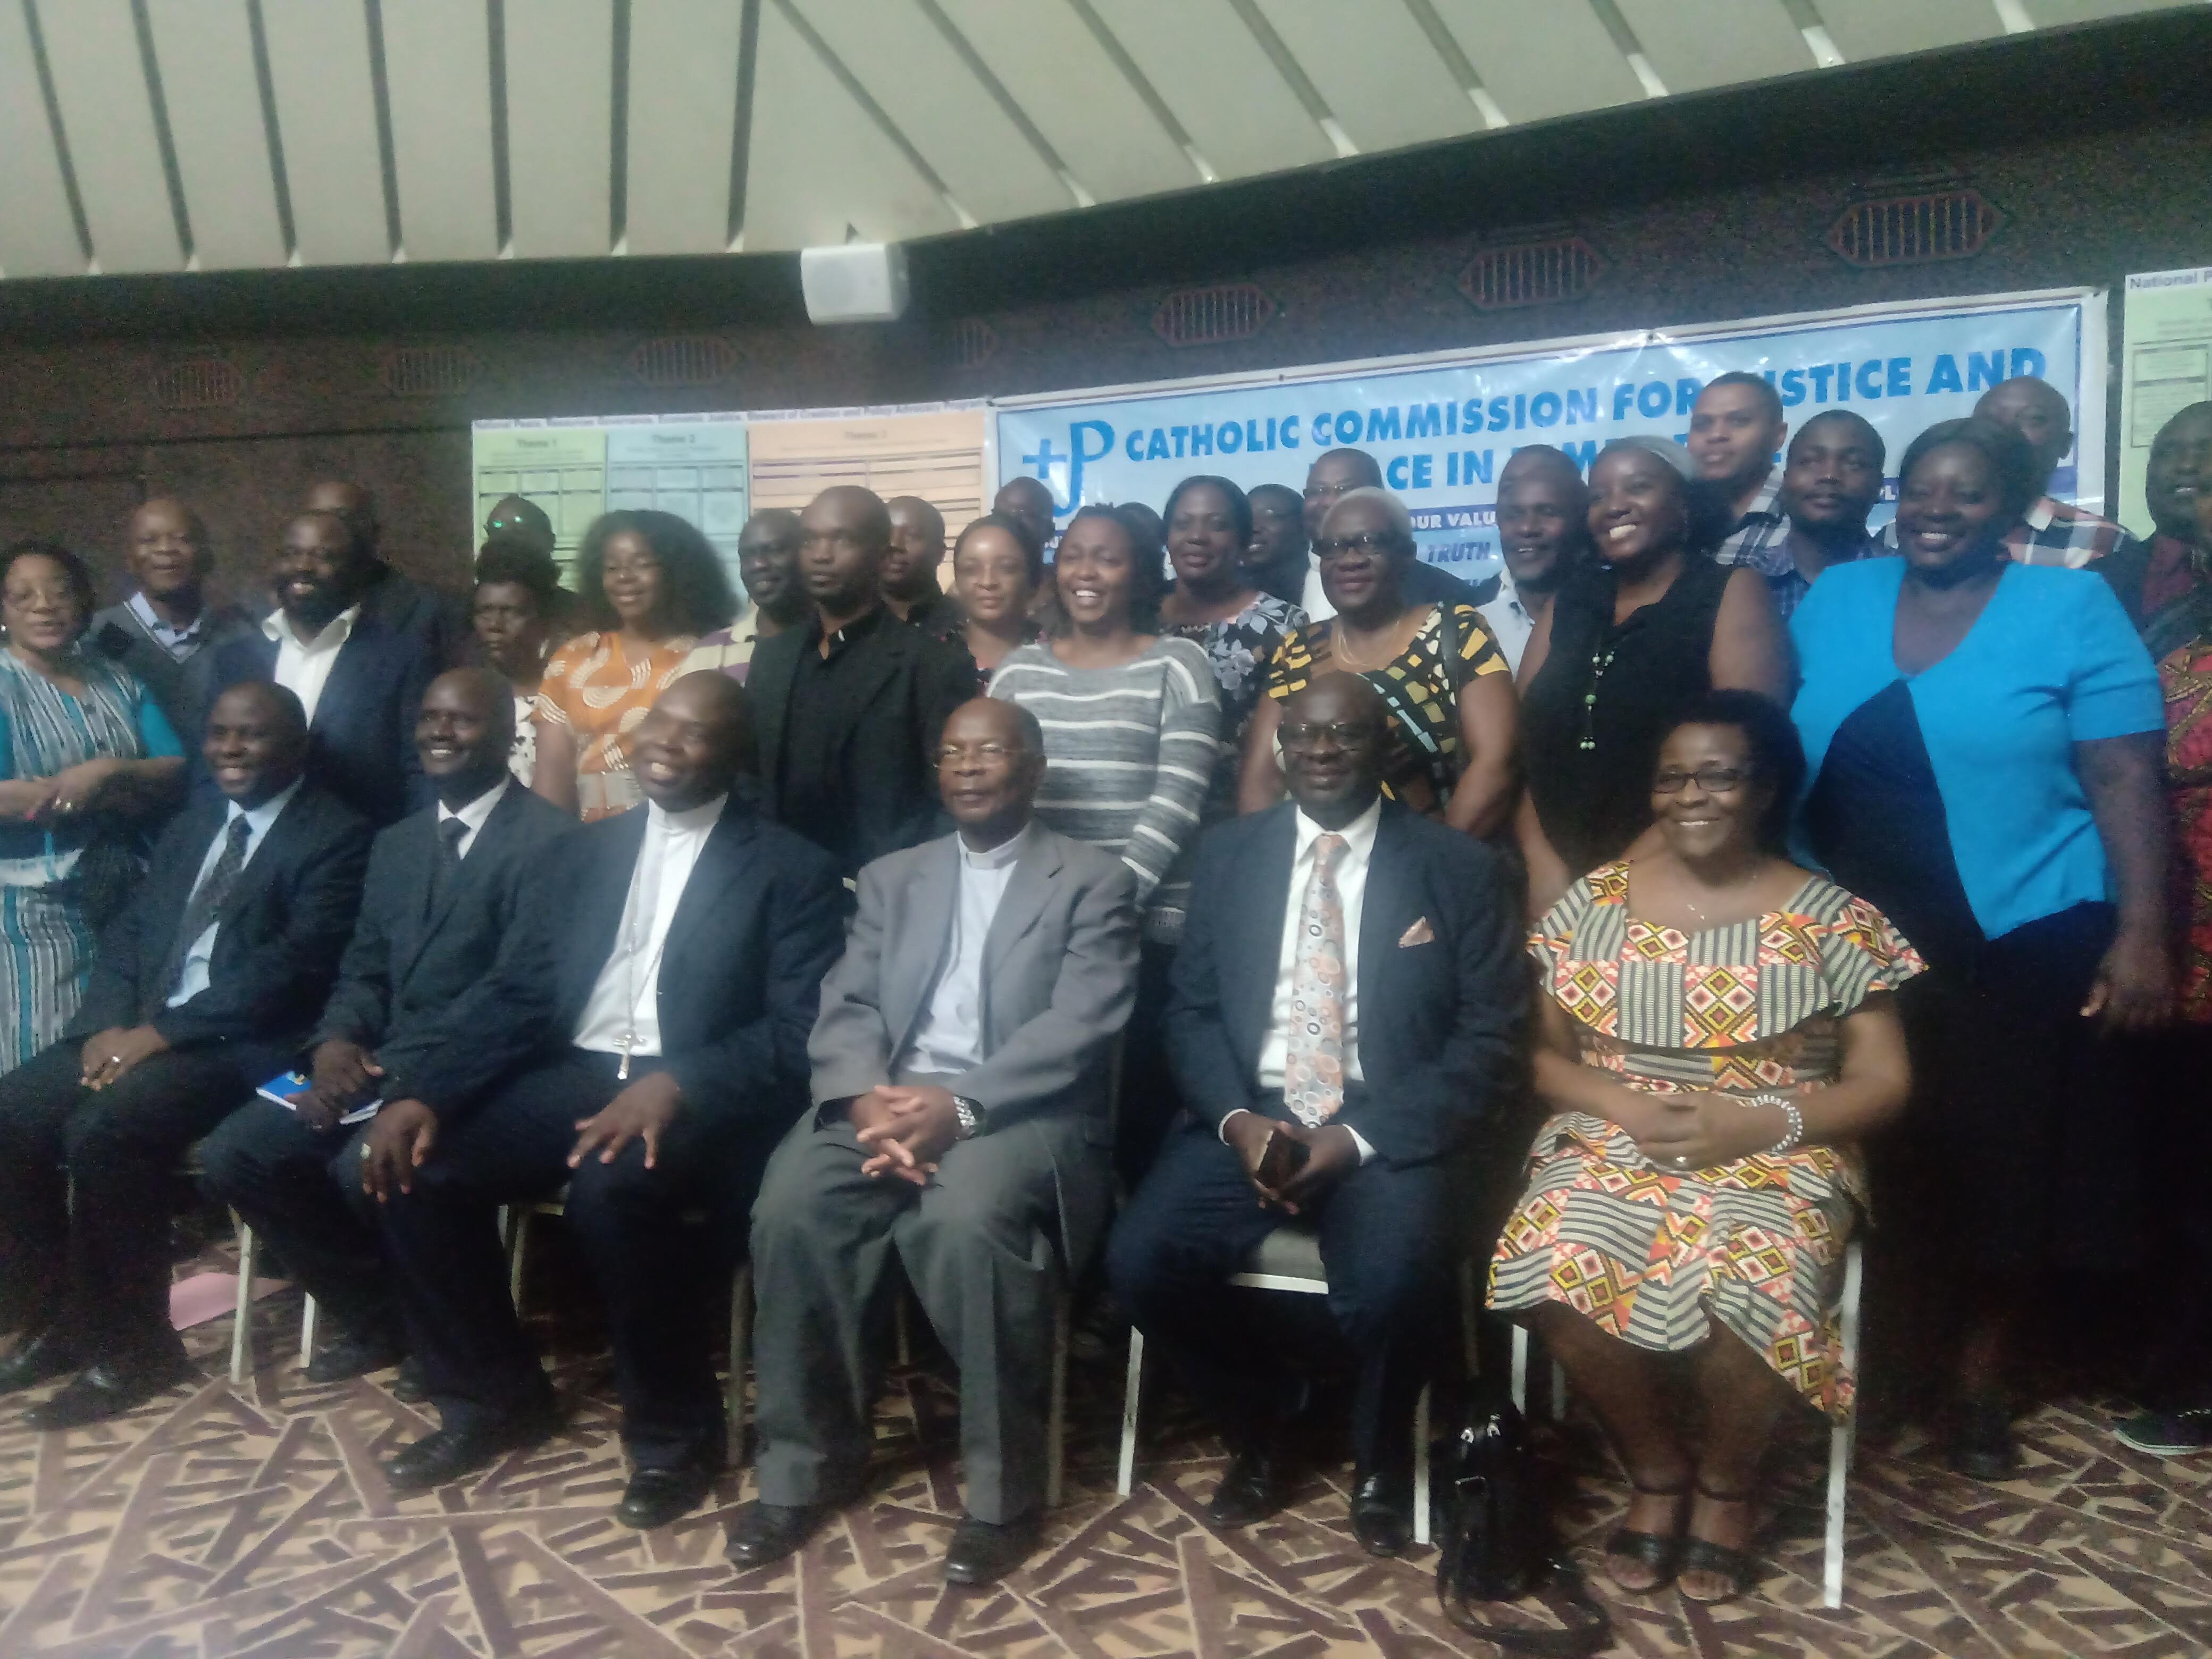 Catholics take major steps towards promoting justice and peace in Zimbabwe